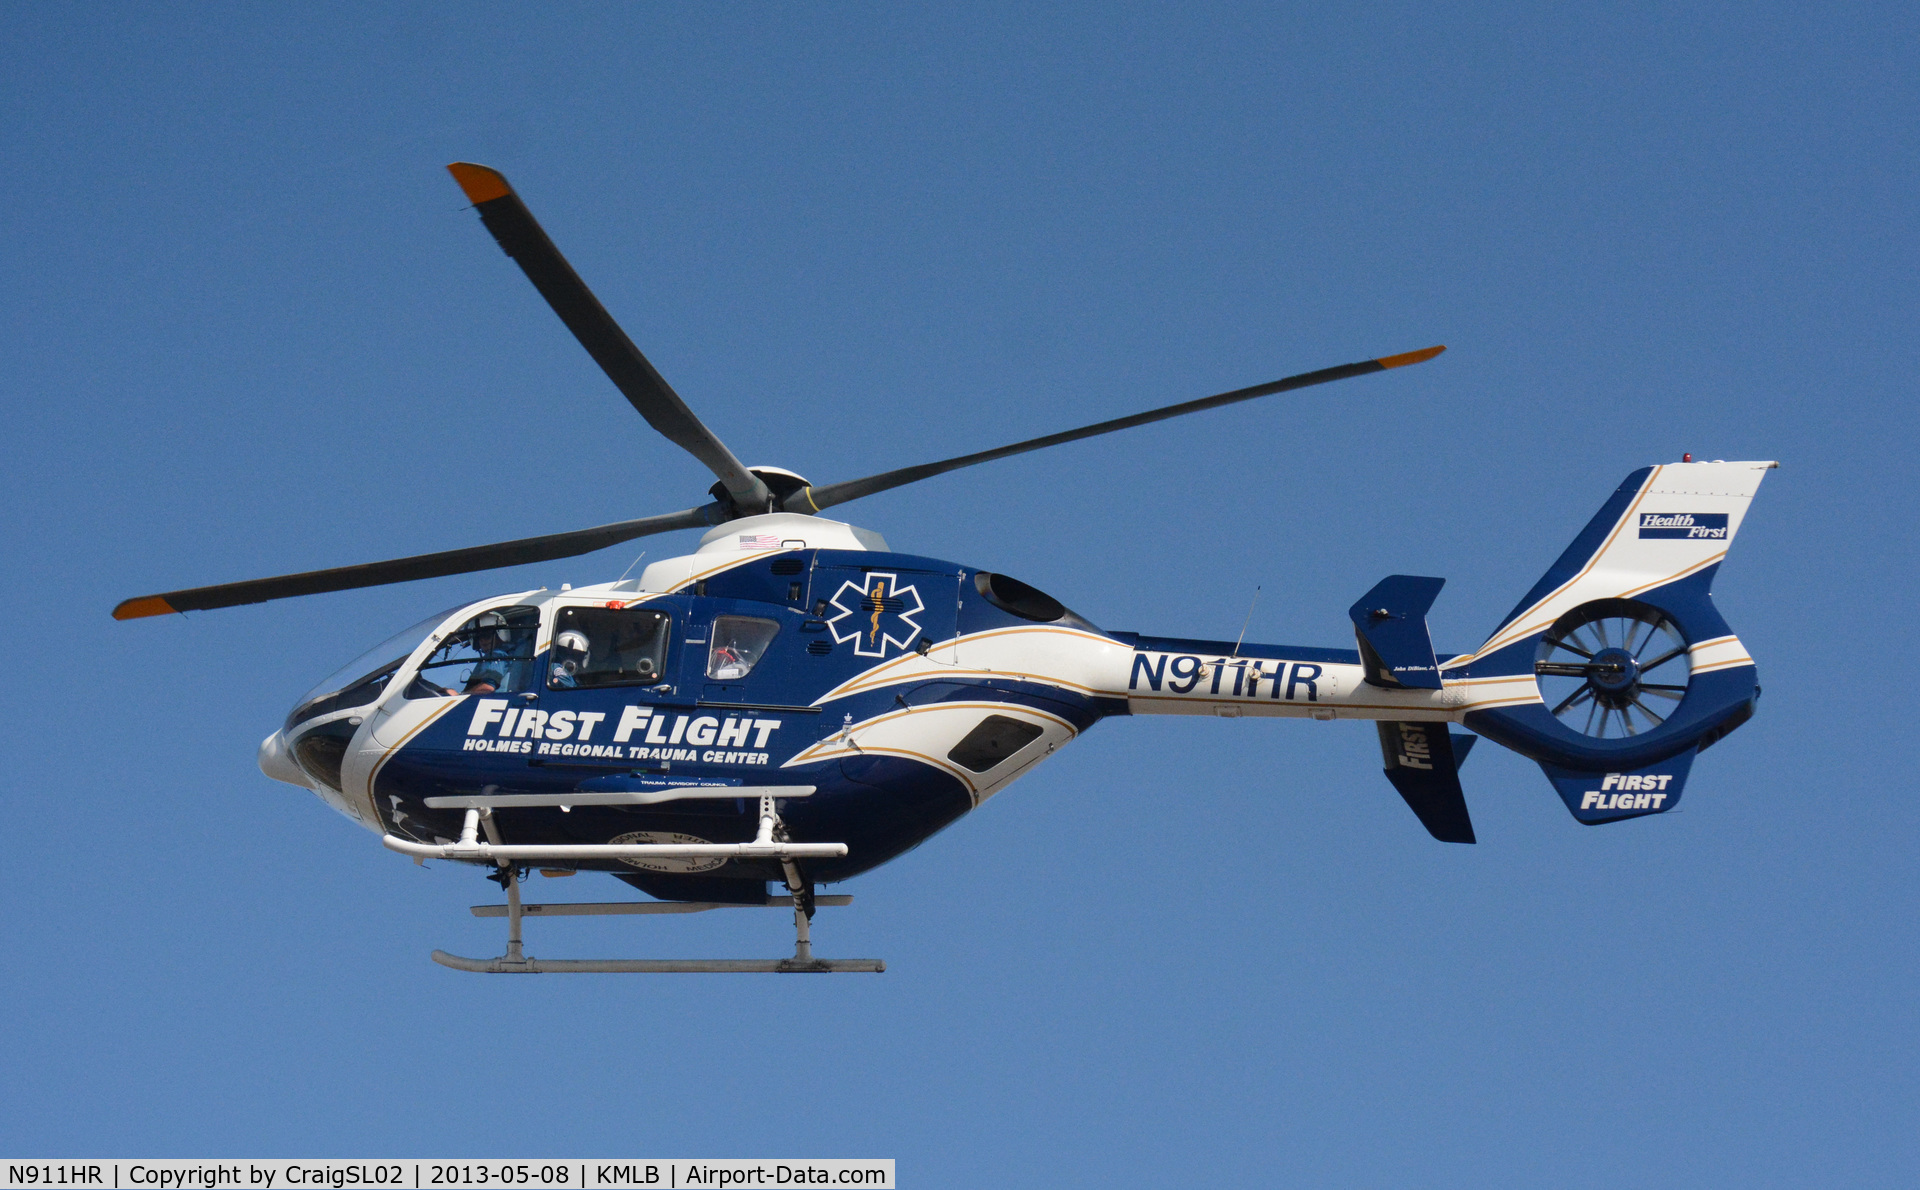 N911HR, 1999 Eurocopter EC-135P-1 C/N 0130, Imaged over Melbourne Intl Airport during mass casualty exercise